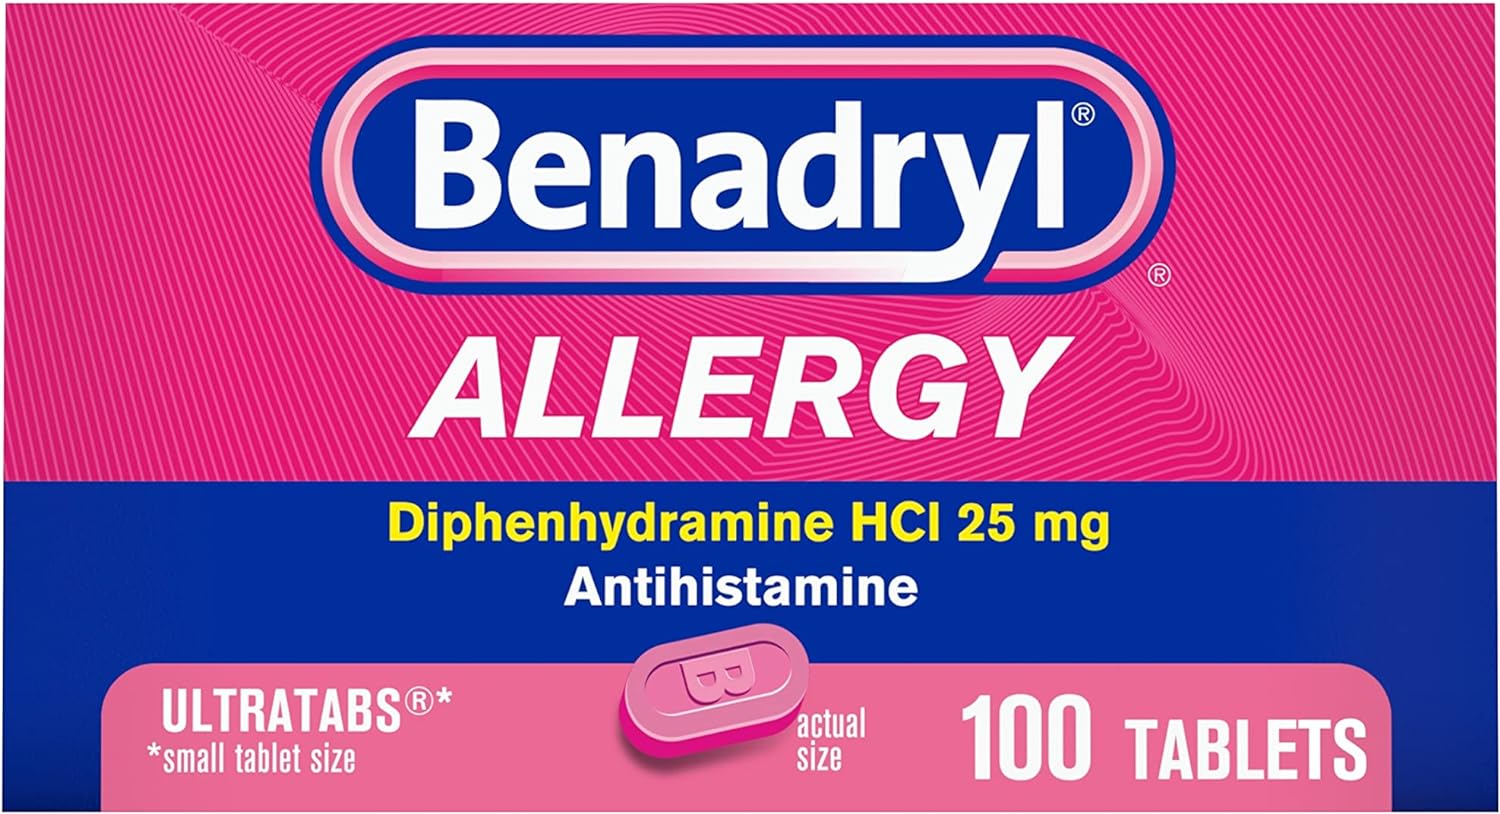 100-Count Benadryl Allergy Antihistamine Allergy Relief Ultratabs 25mg Diphenhydramine HCl Tablets ​$8.93 ($0.09 each) w/ S&S + Free Shipping w/ Prime or on $35+